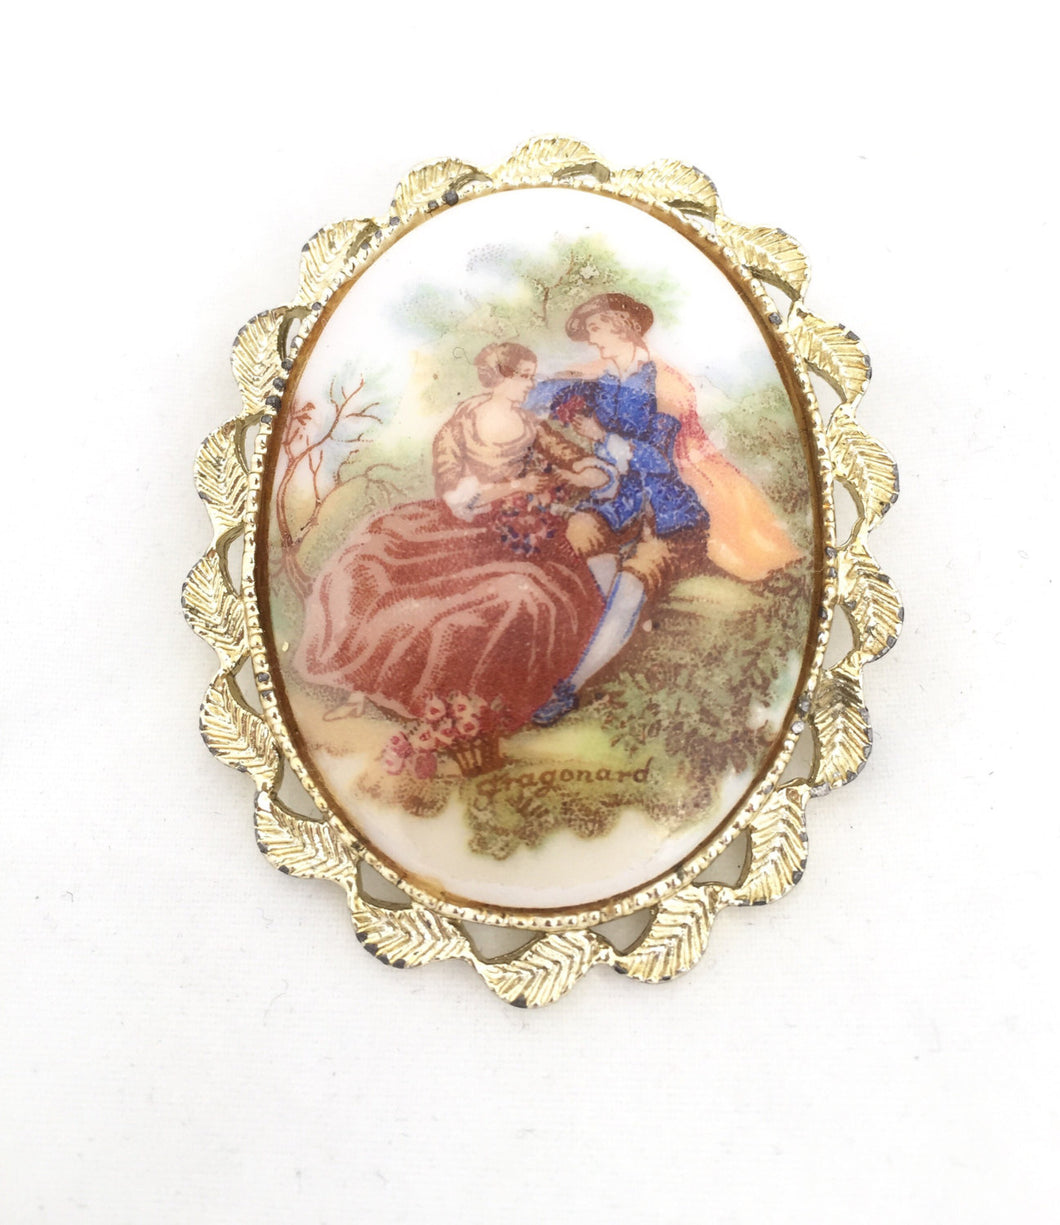 Cabochon Cameo brooch Lovers Cameo French Plastic Cameo marked Fragonard. Lovers Scene Cameo in gold tone setting